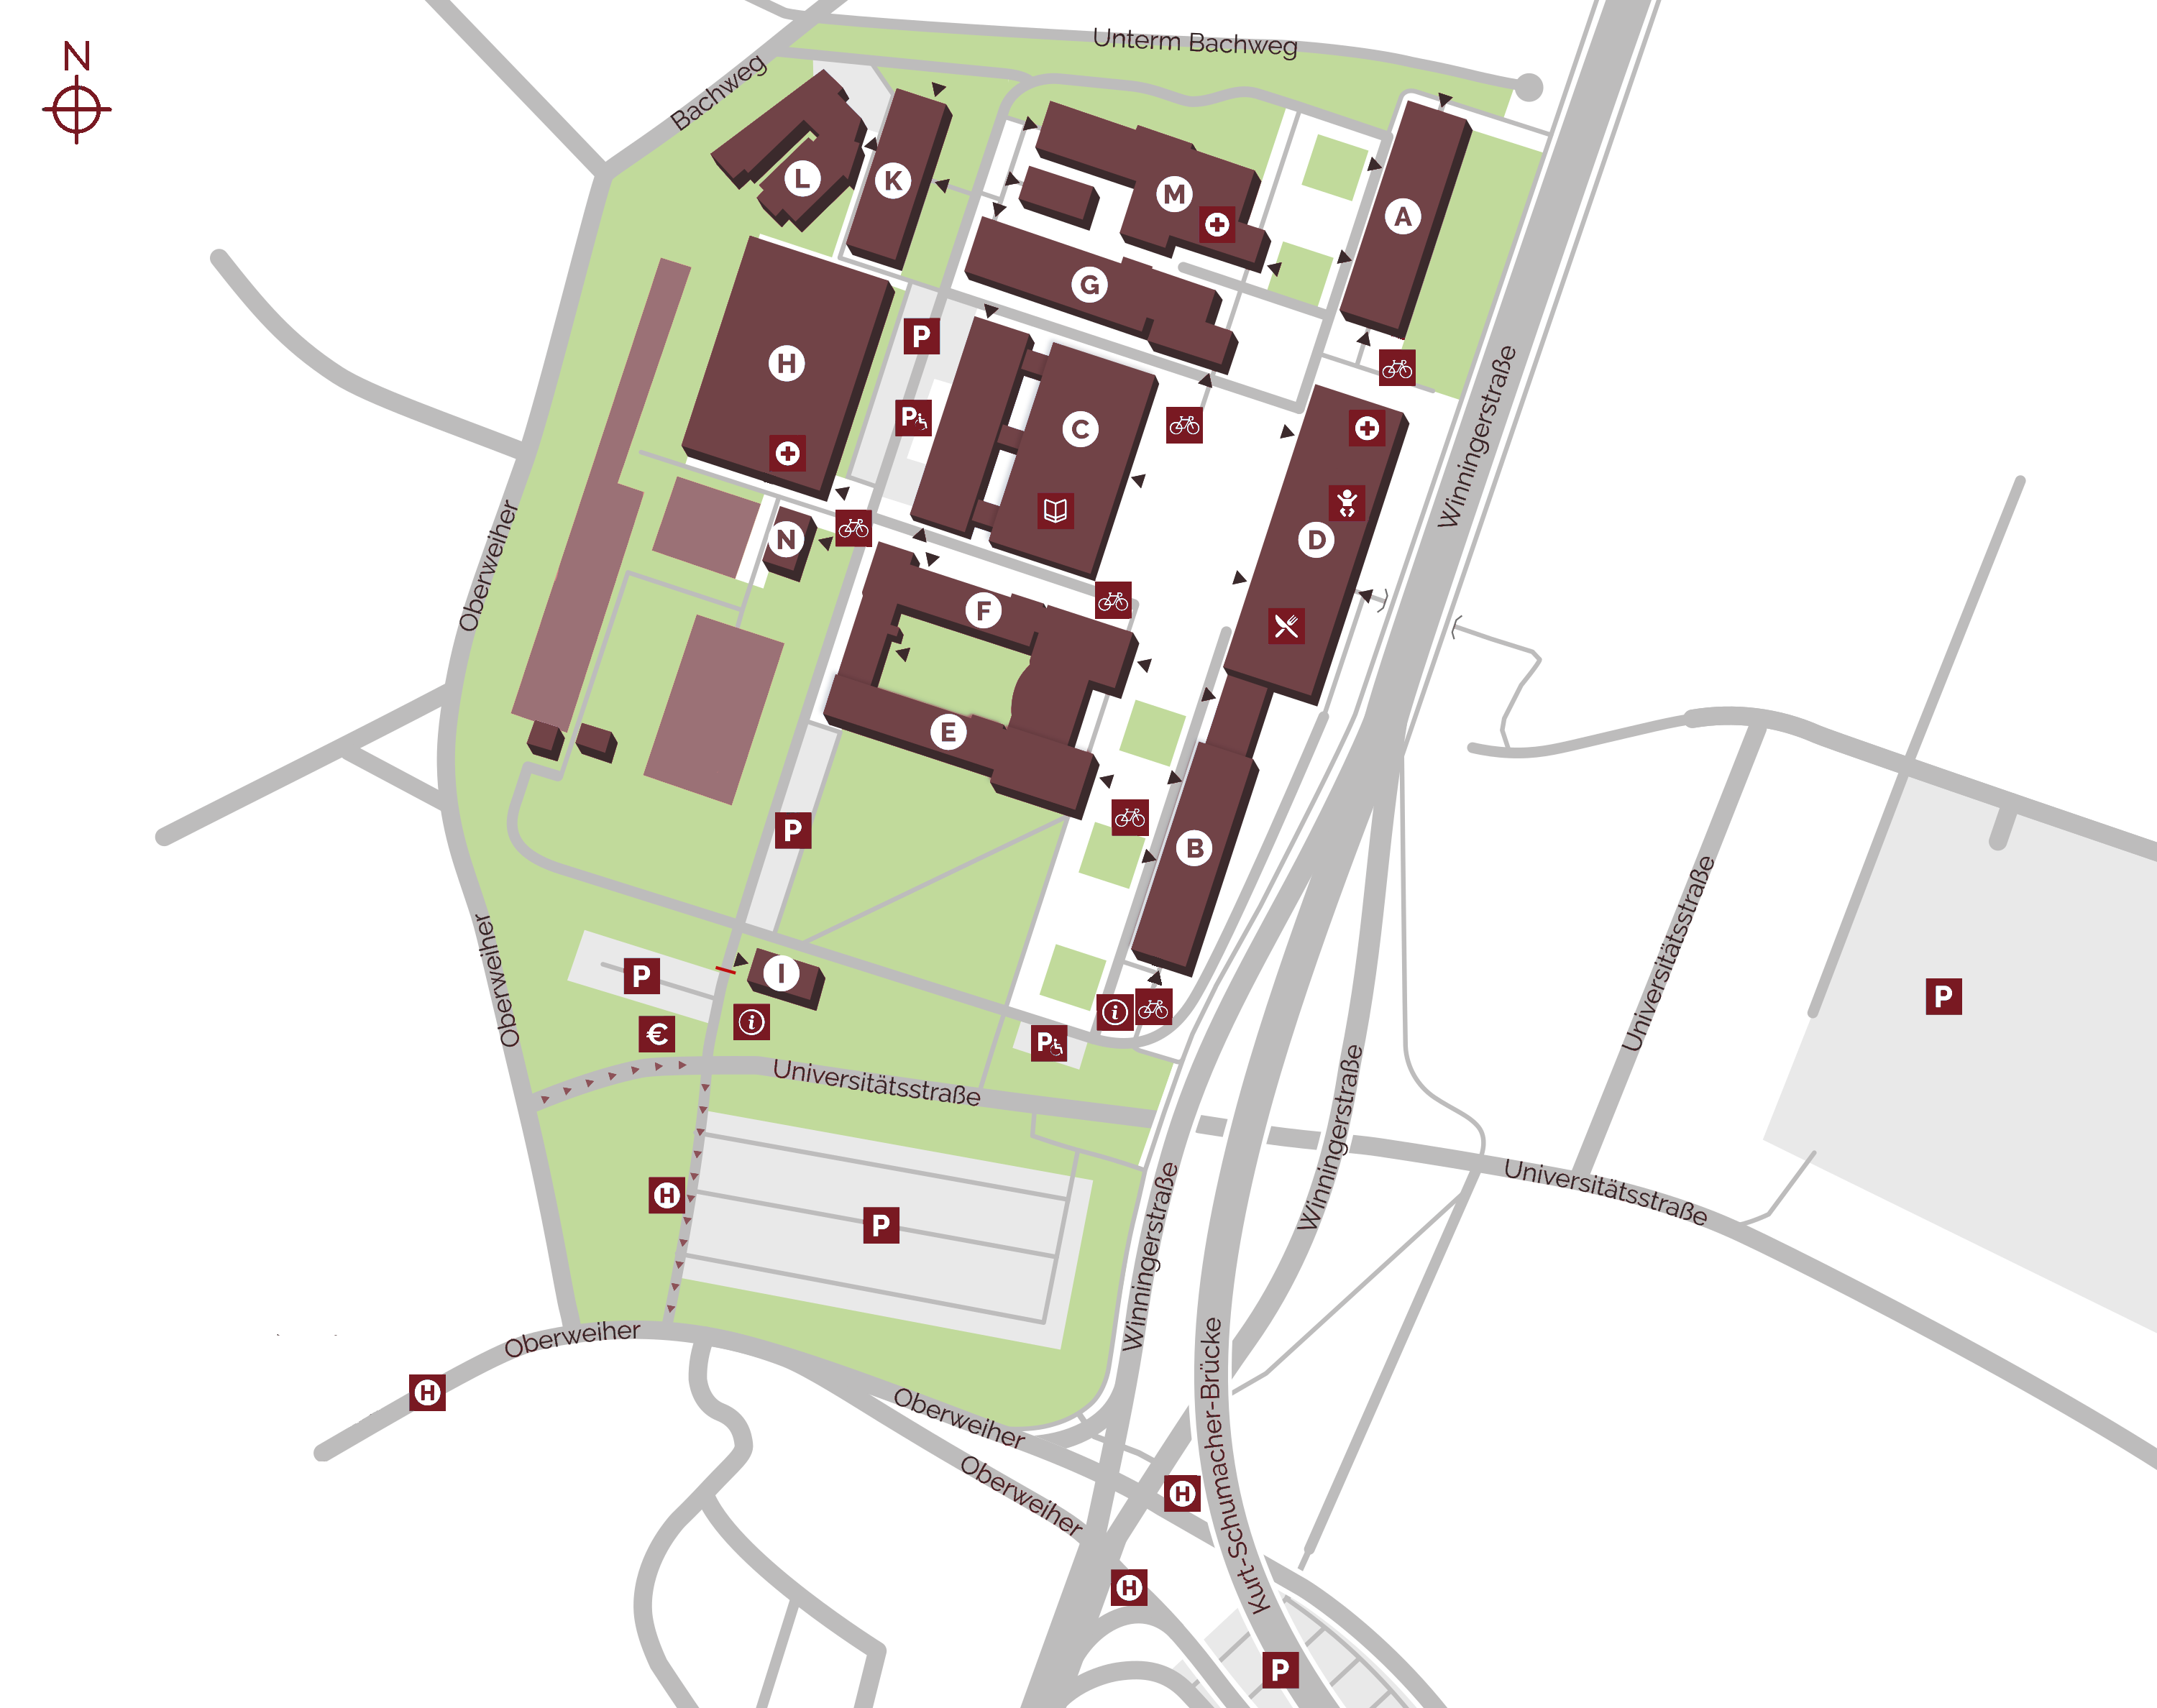 [Campus map for Koblenz University, Germany]